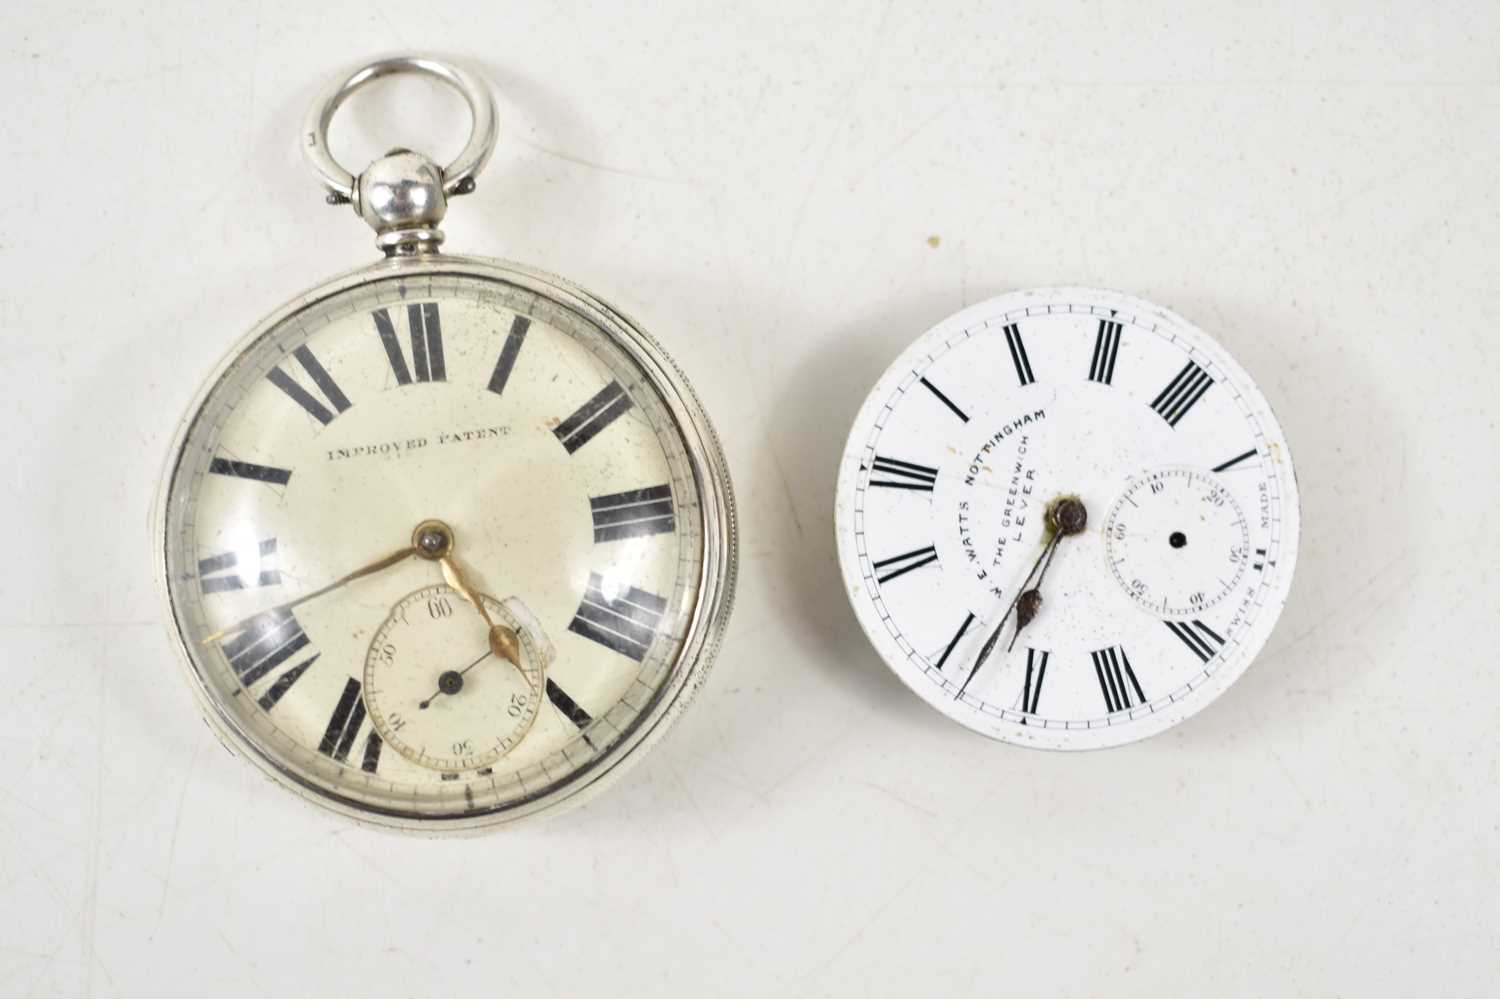 A Victorian Improved Patent silver cased pocket watch with white dial, Roman numerals and subsidiary